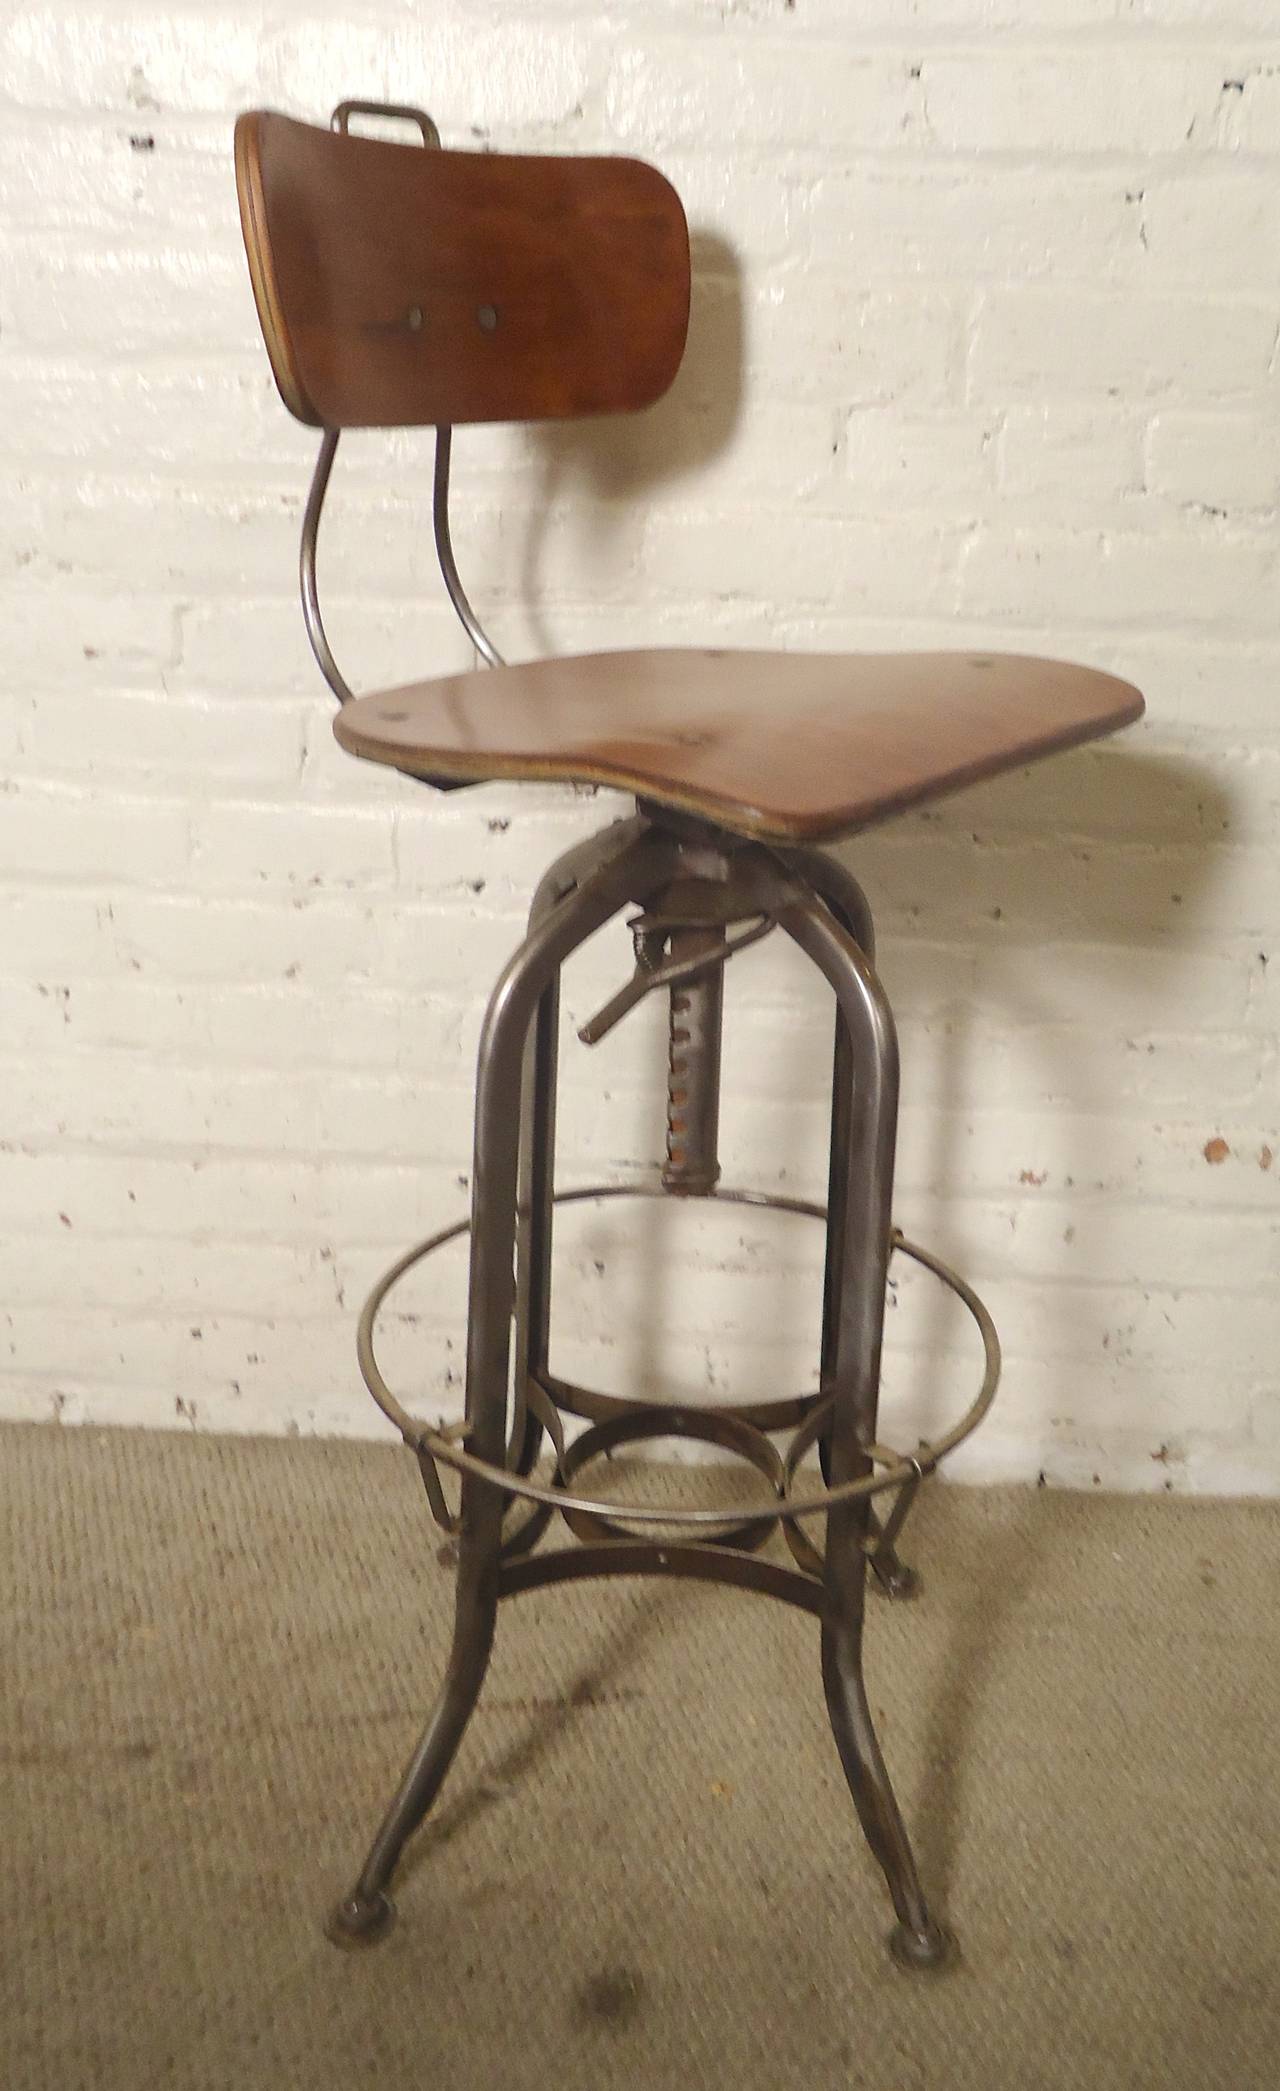 Set of four Toledo stools completely restored. Hand rubbed finished bentwood seats, Industrial bare metal style base. Gives a great contrast to your modern bar or kitchen island.

(Please confirm item location - NY or NJ - with dealer).